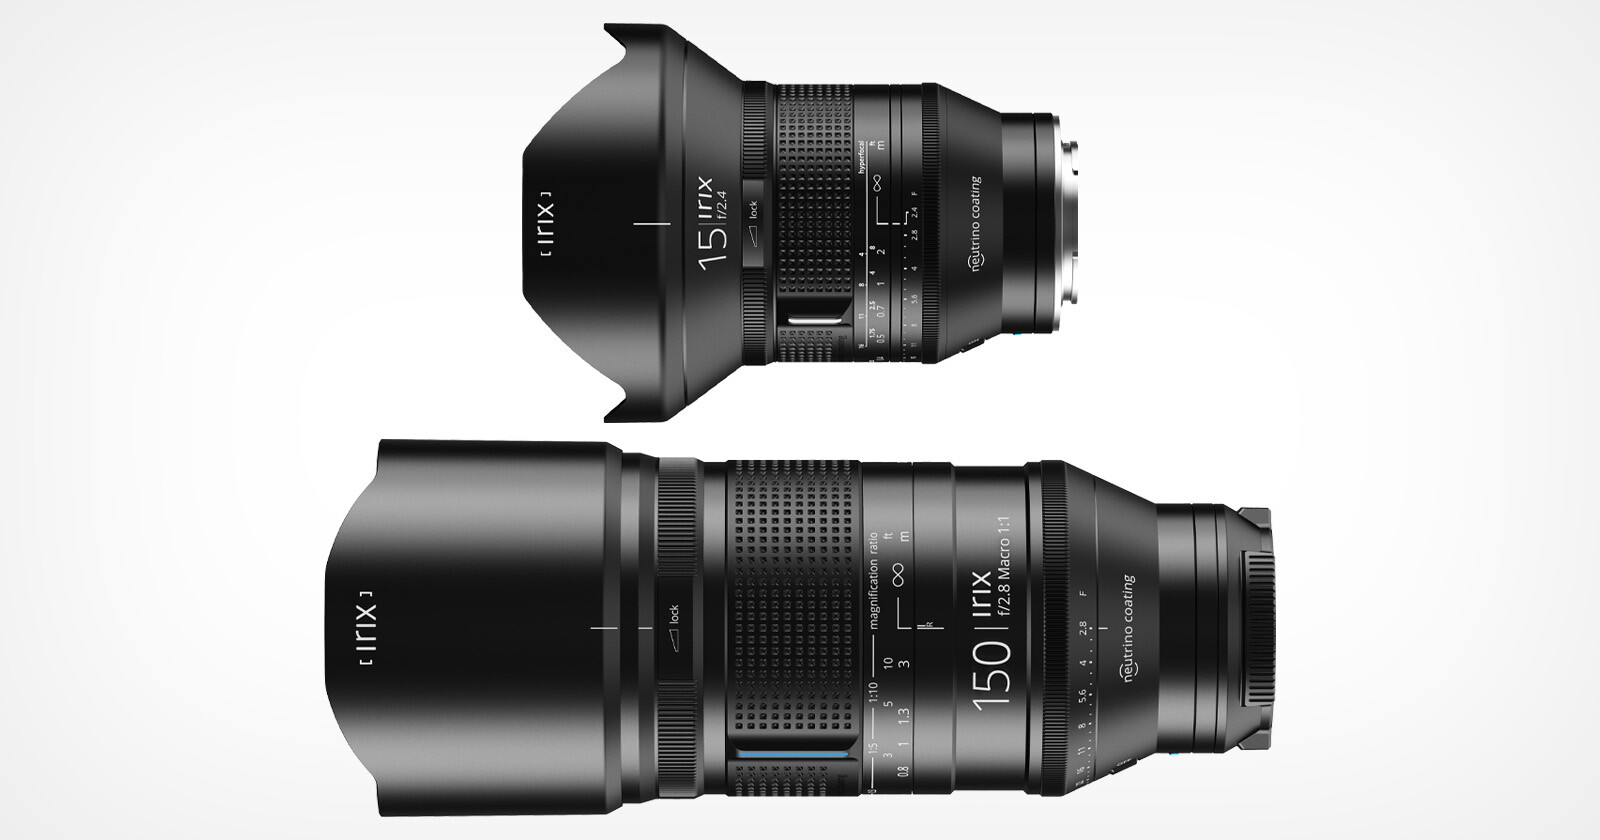 Irix Launches 15mm f/2.4 and 150mm f/2.8 Lenses for Sony E-Mount